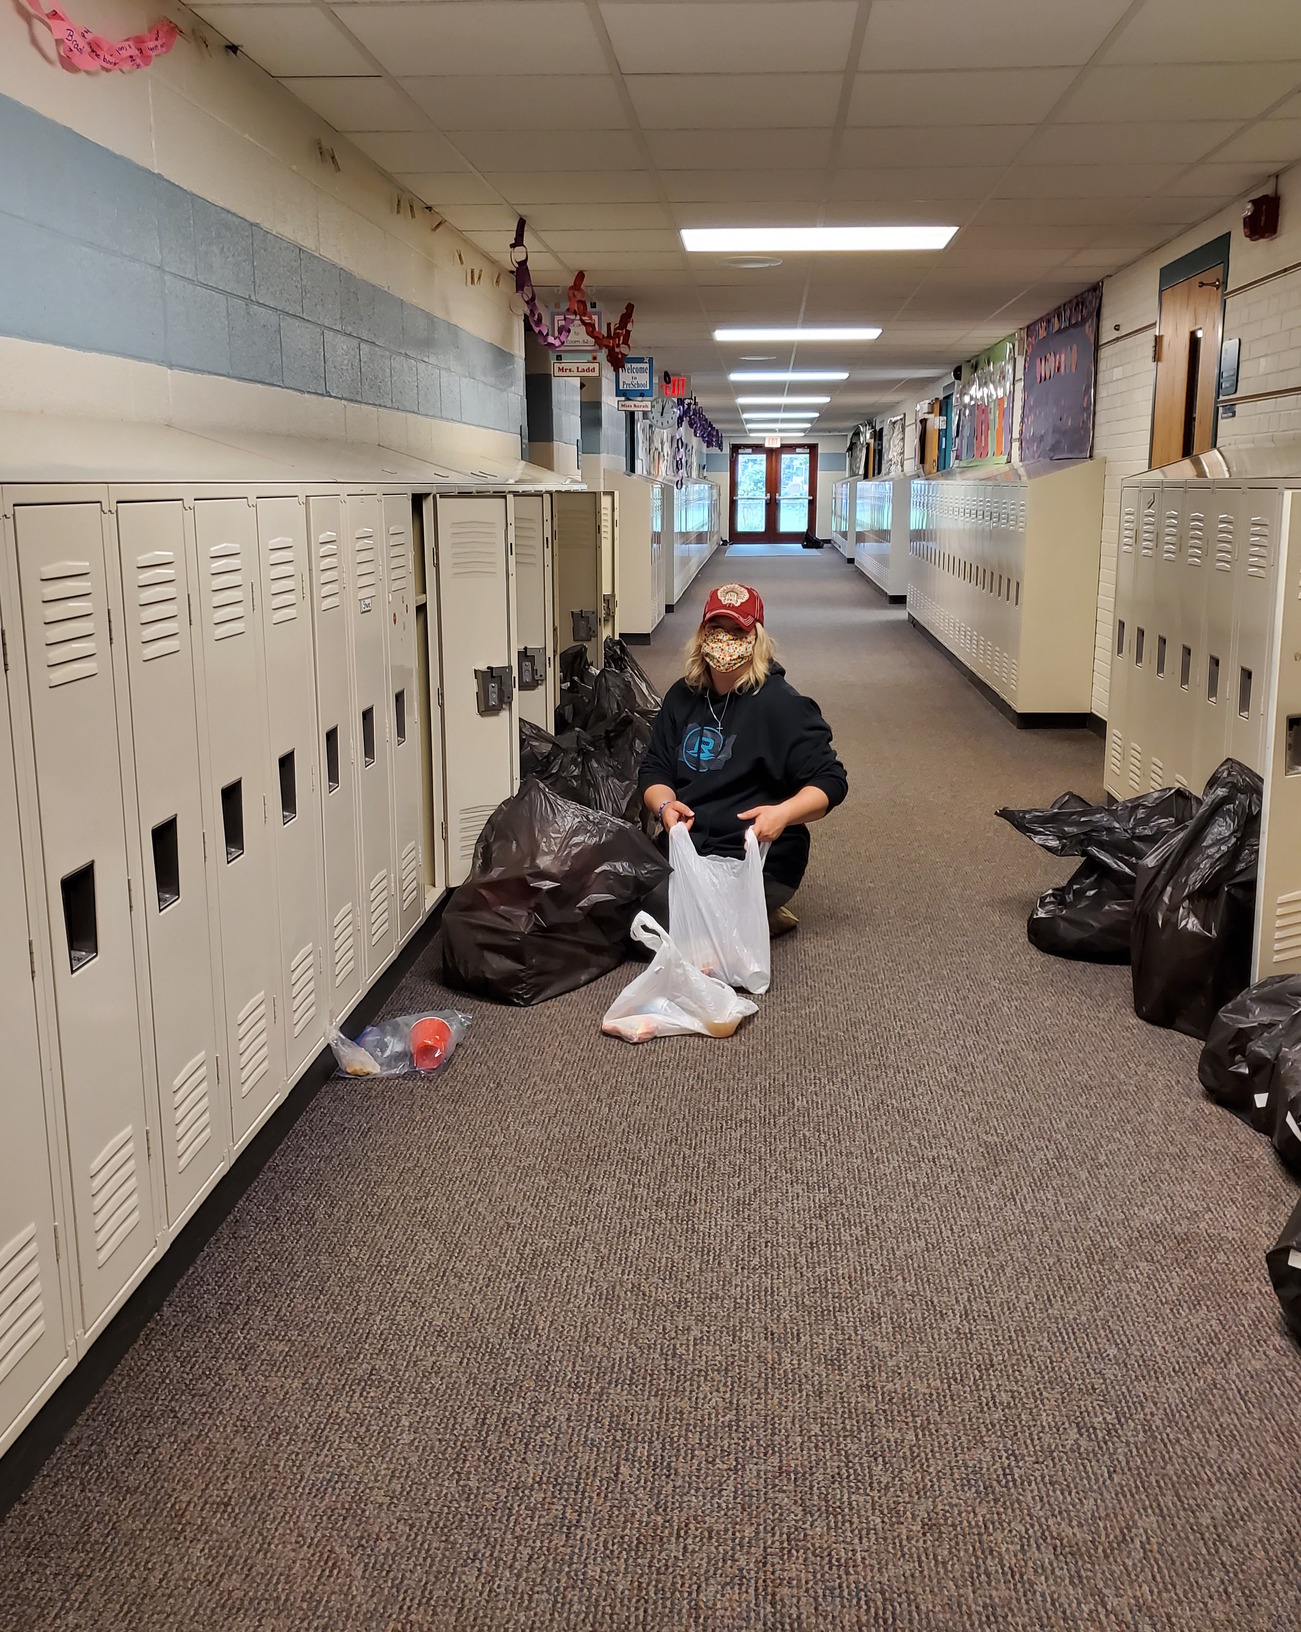 Staff emptying lockers for student pickup